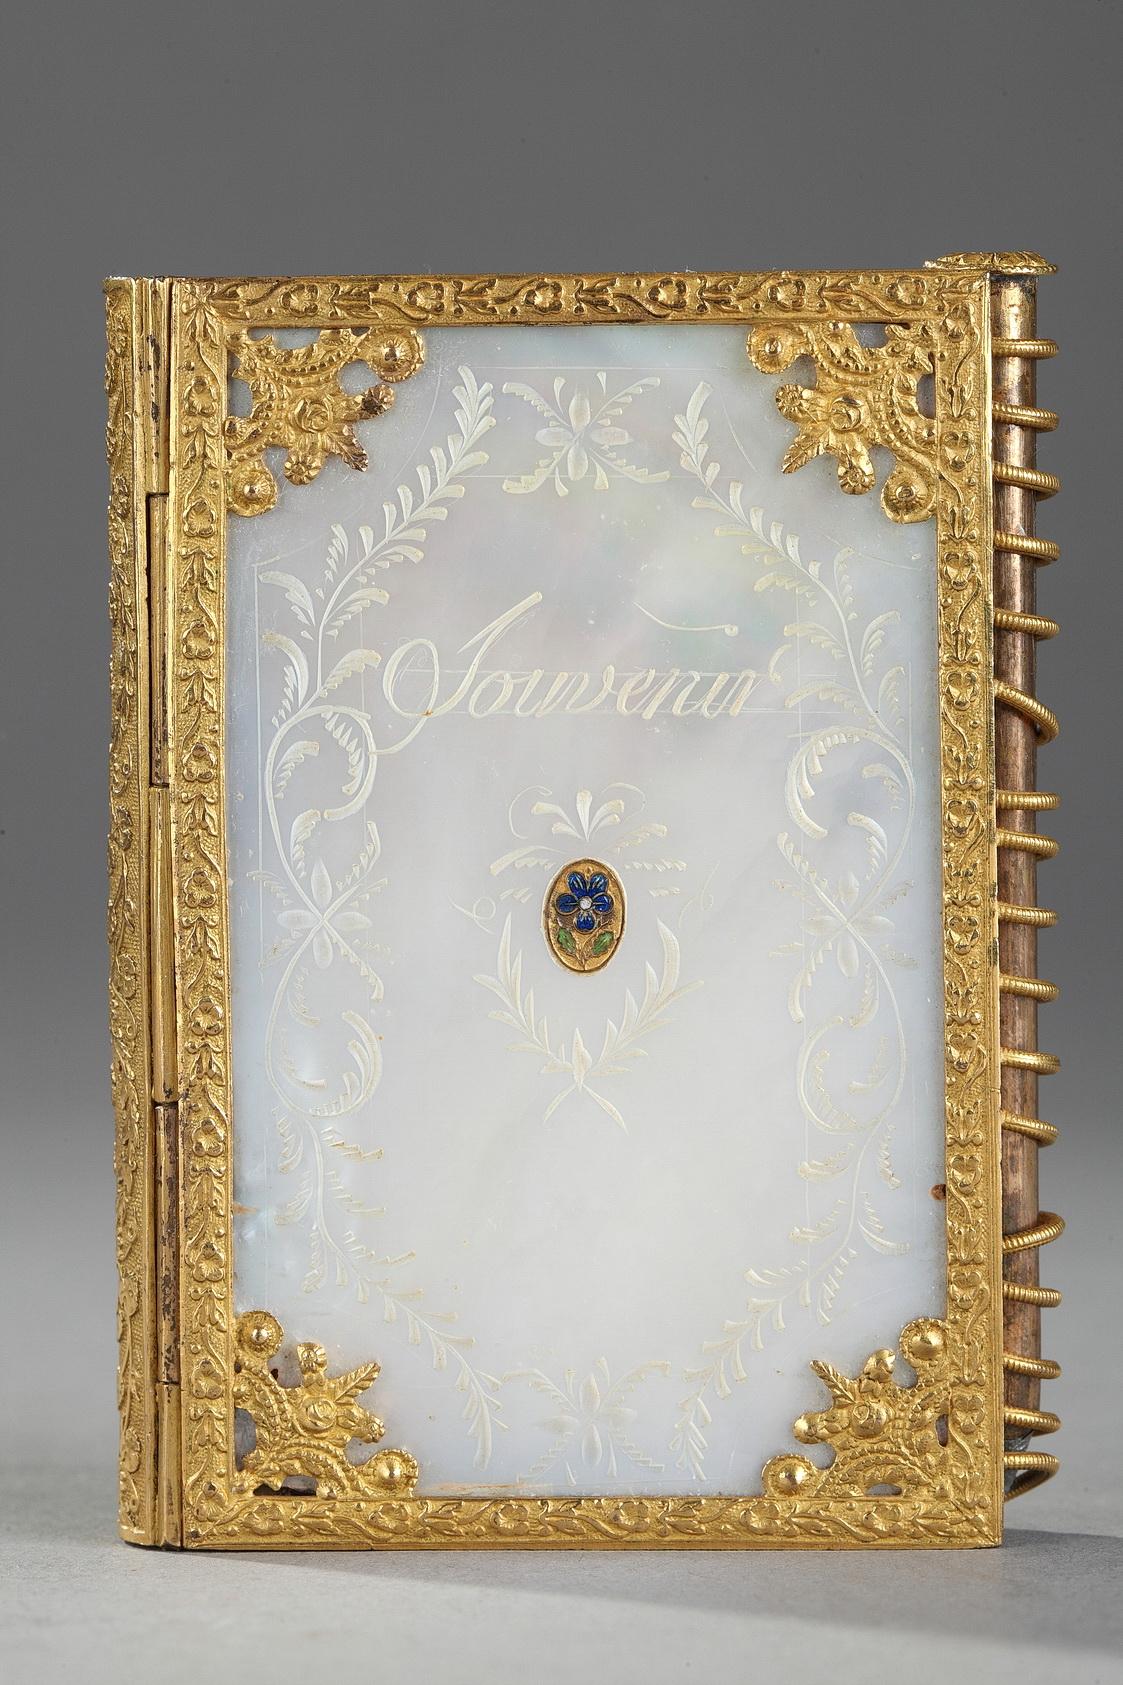 A small Charles X ball notebook in mother-of-pearl and ormolu chiselled with flowers and flowery interlacings. Engraved in French 